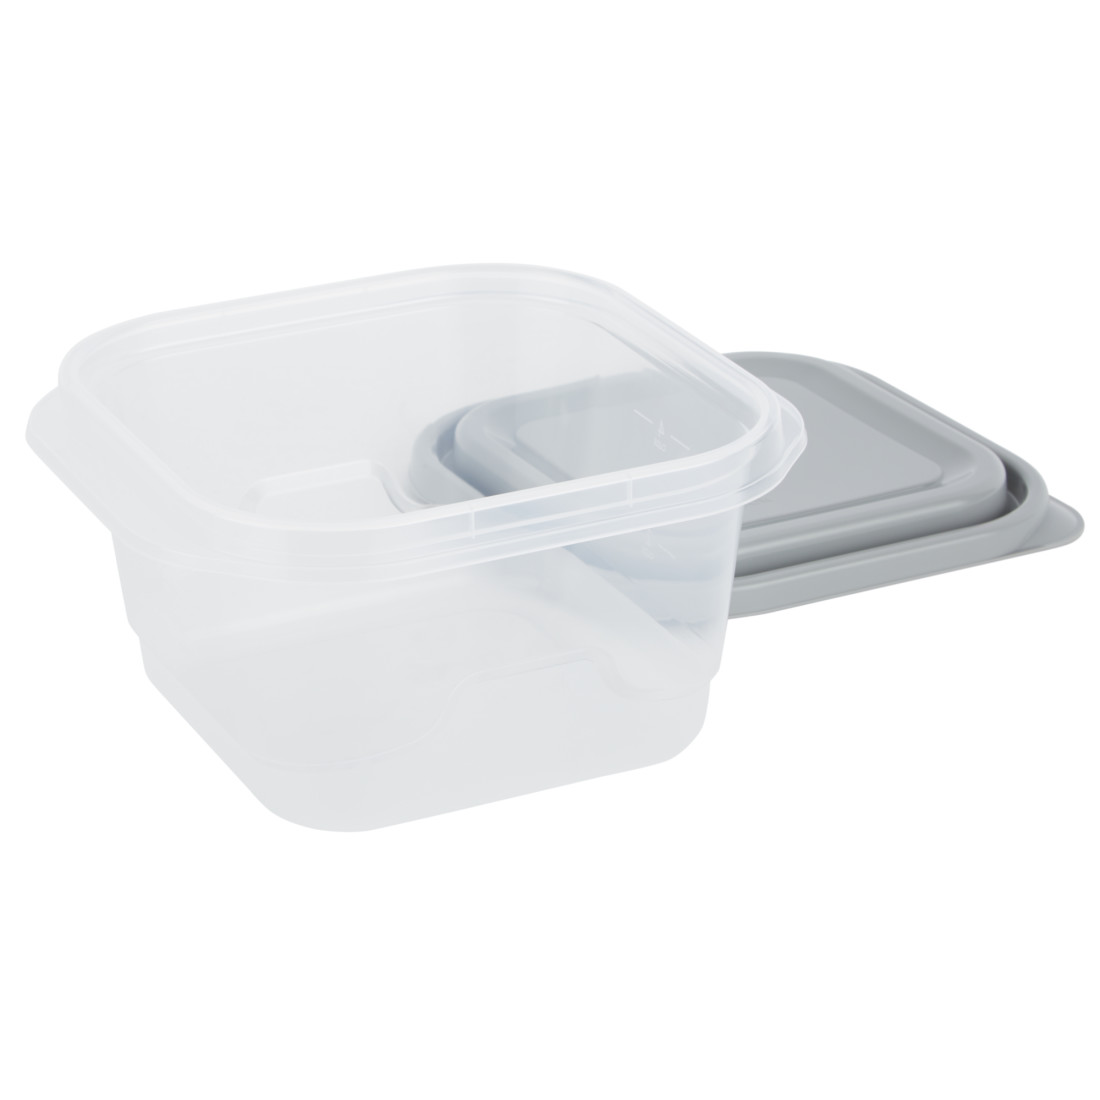 8-Cup Food Container, large rectangle, 2-Piece Set - GoodCook